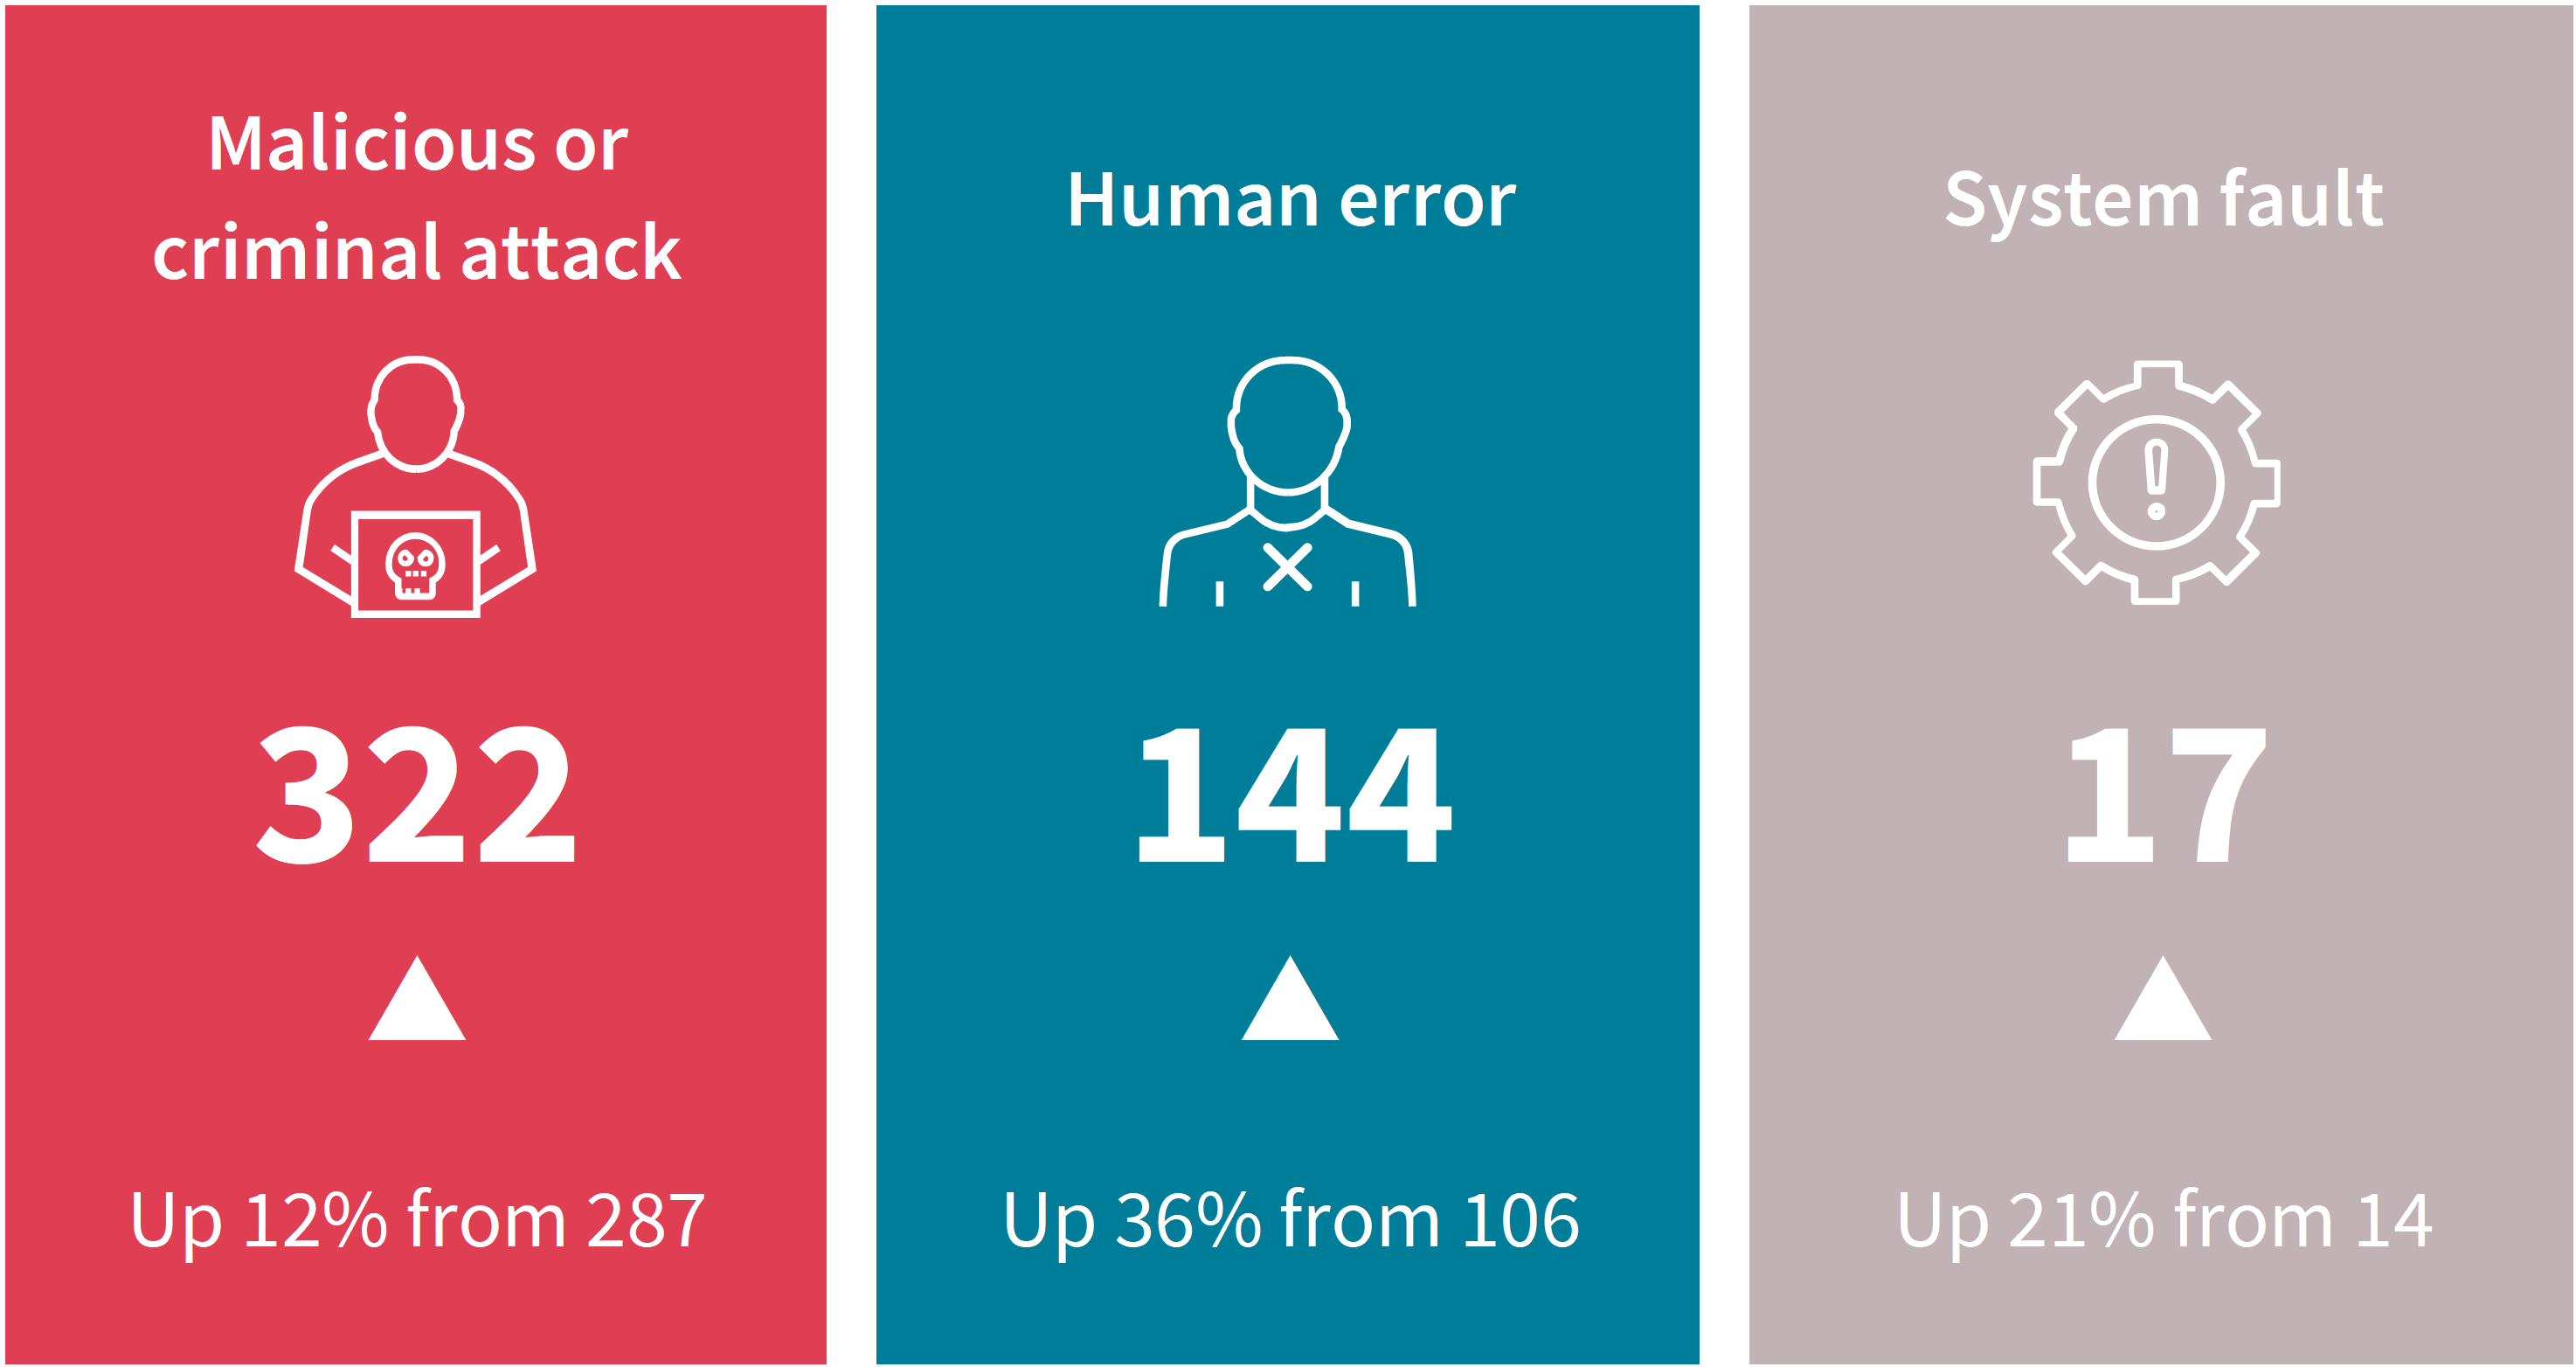 Infographic showing data breach causes: Malicious attacks at 322, up 12% from 287: Human error at 144 up 36% from 106; System faults at 17 up 21% from 104.